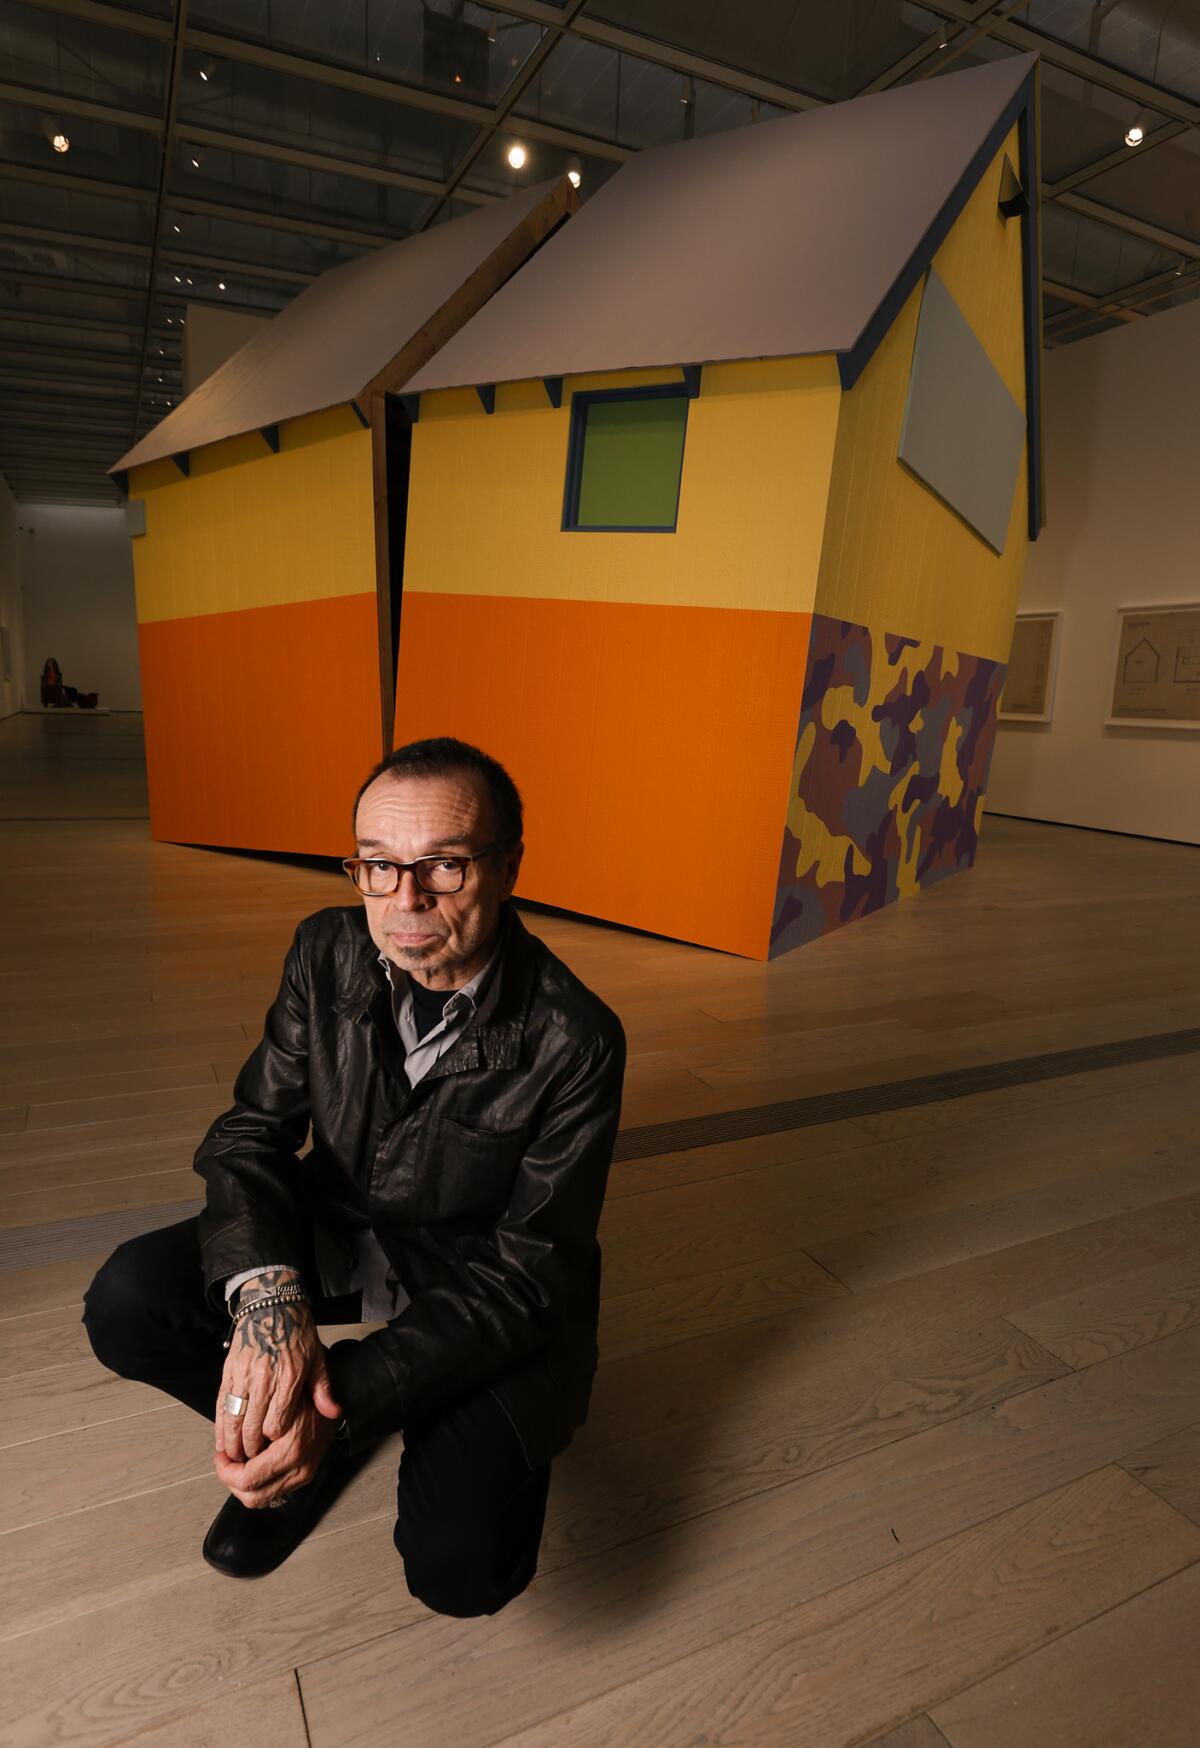 Artist Daniel Joseph Martinez with his sculpture, "The House America Built" (2004/2017), inspired by the Unabomber cabin.